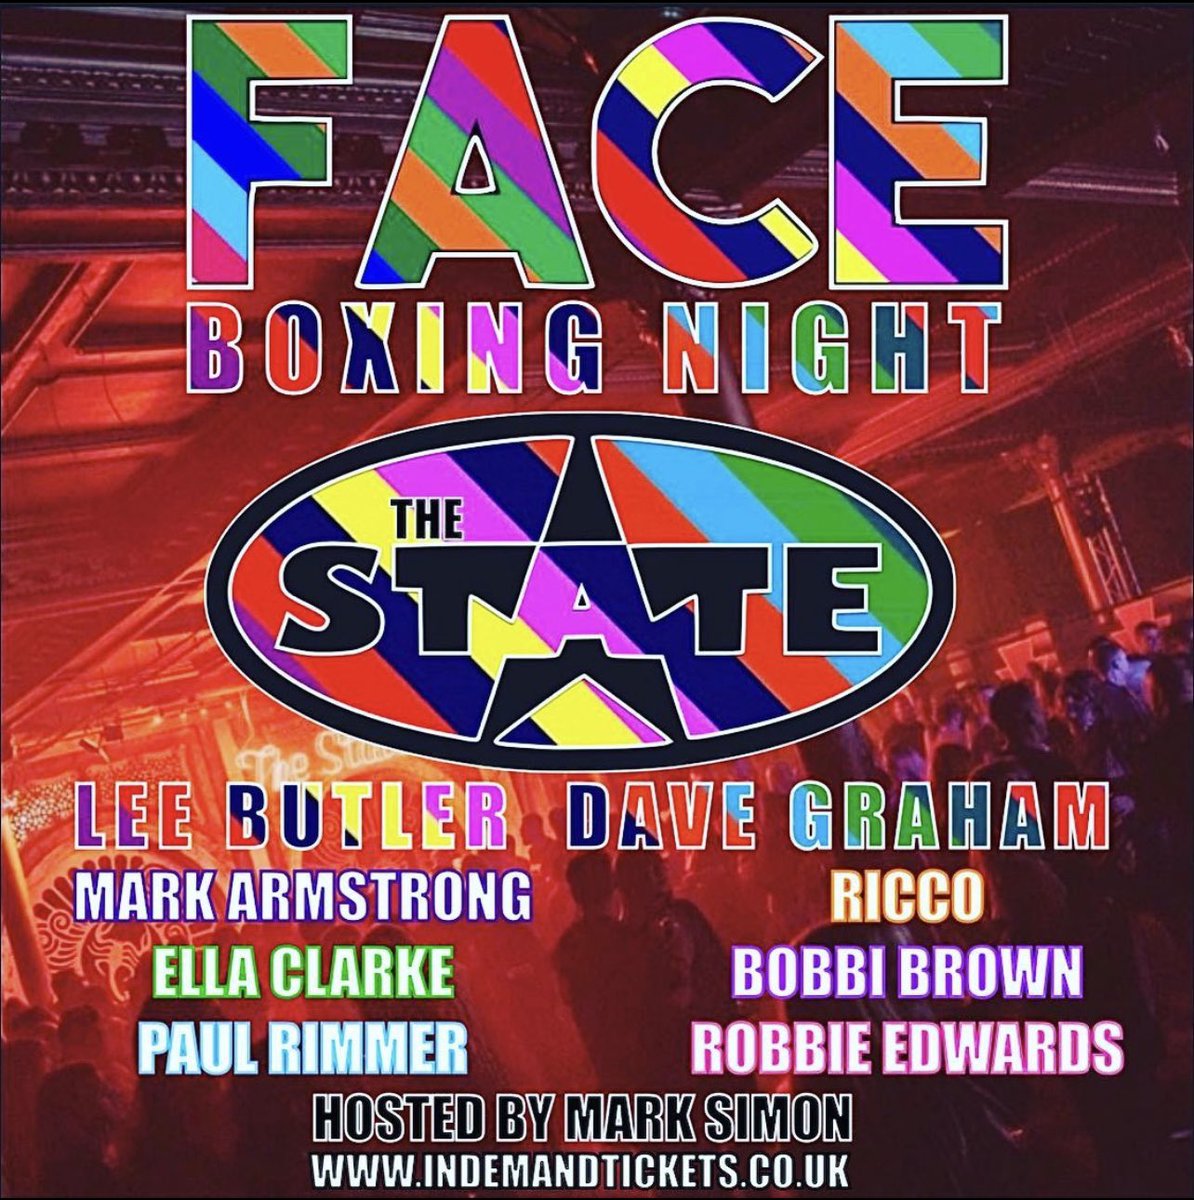 MADE UP TO BE HOSTING THIS FOR FACE EVENTS… this is a guaranteed sell out. Get to INDEMENDTICKETS.CO.UK to secure your tickets